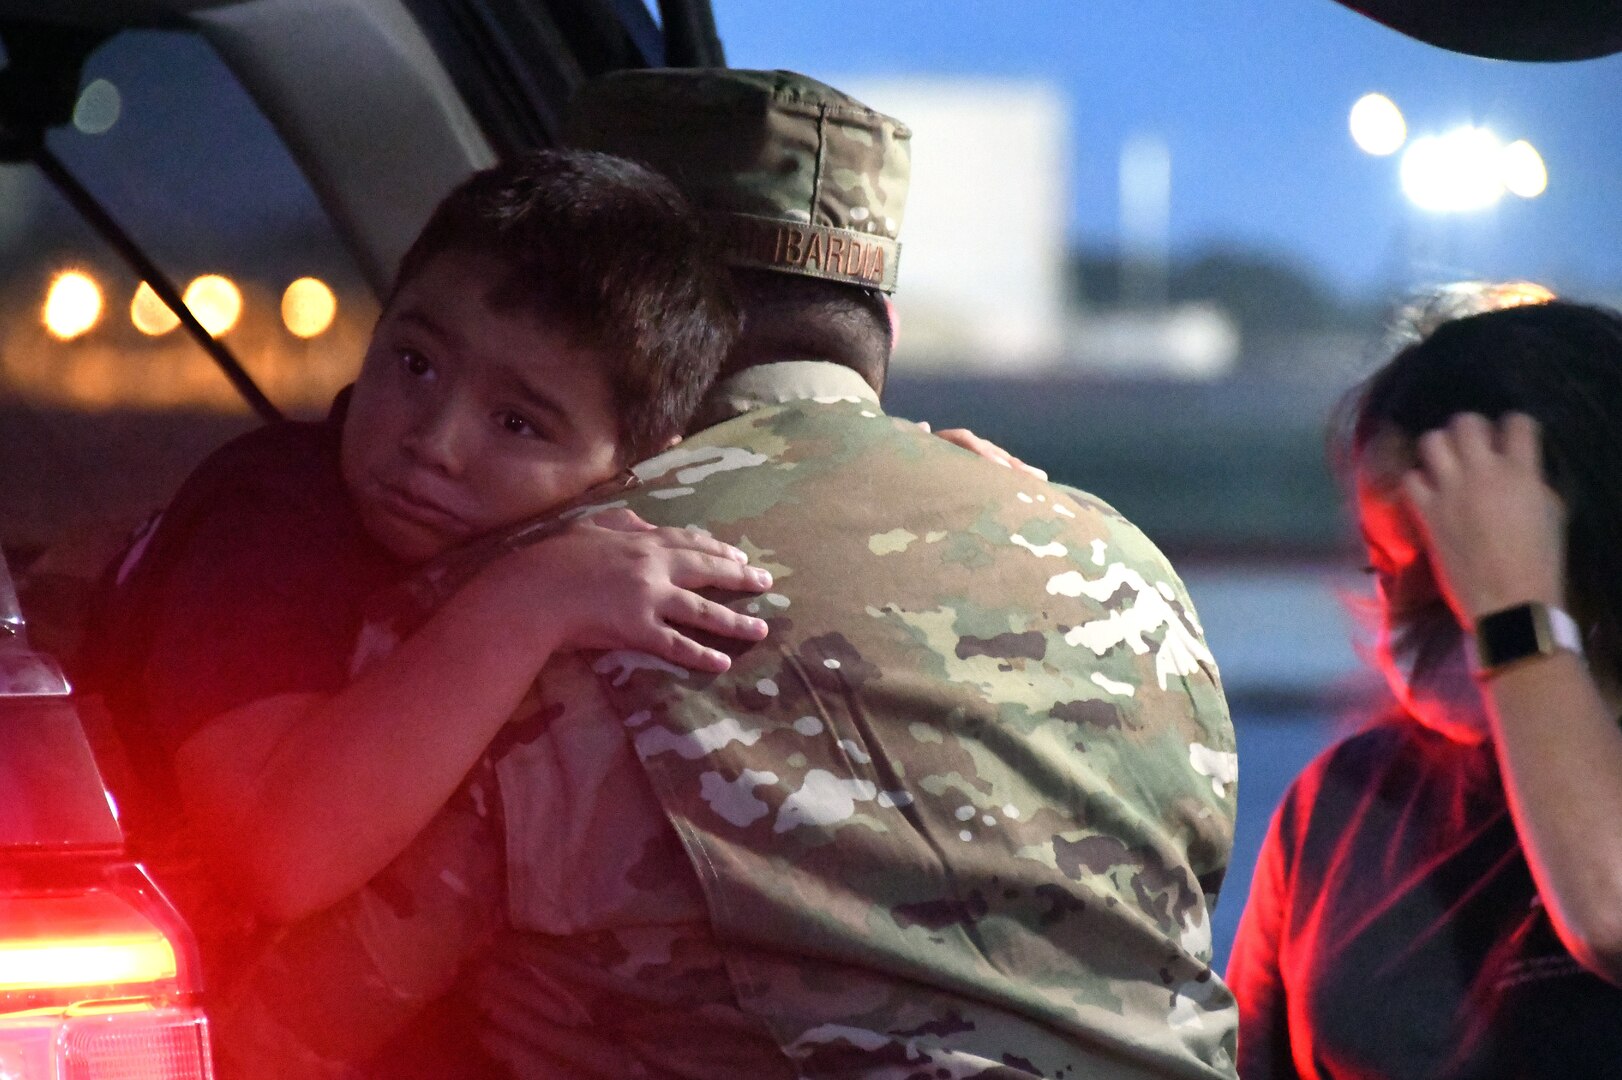 Tech. Sgt. Charles Lambardia, 433rd Civil Engineer Squadron firefighter, hugs his son, Liam, as he prepares to leave for a deployment June 28, 2020, at Joint Base San Antonio-Lackland, Texas.